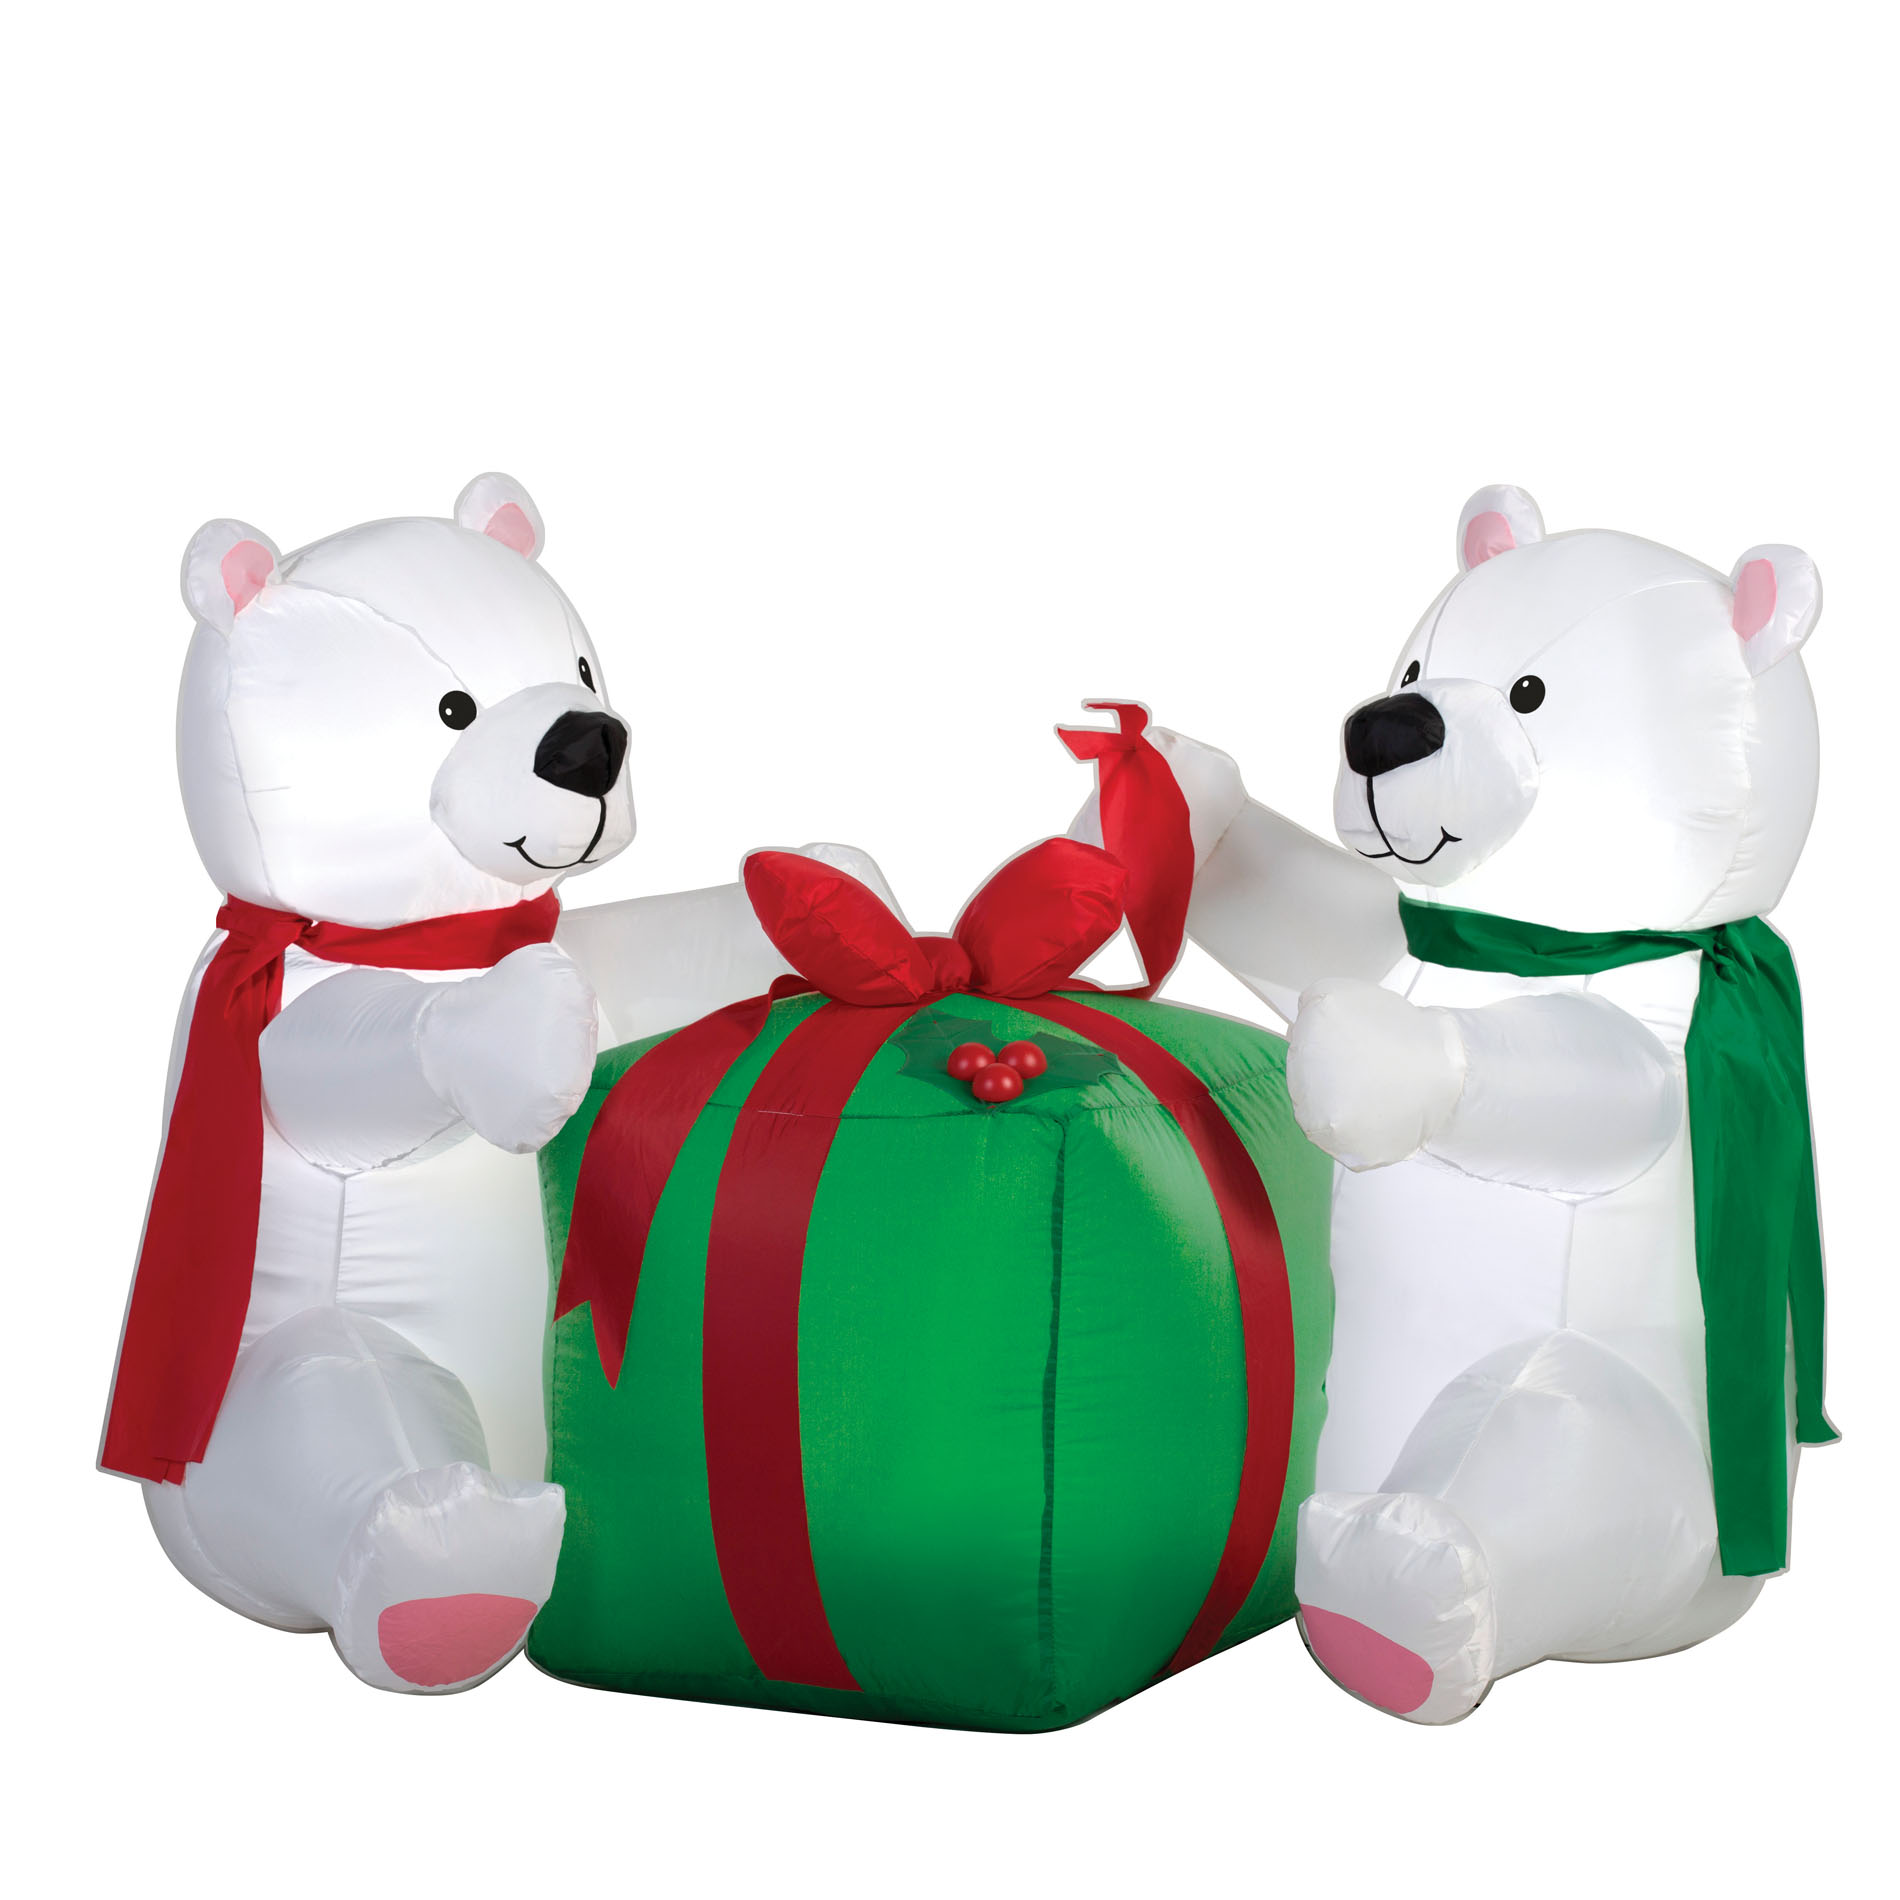 5.5" Airblown Polar Bear Cubs Playing With Gift Box